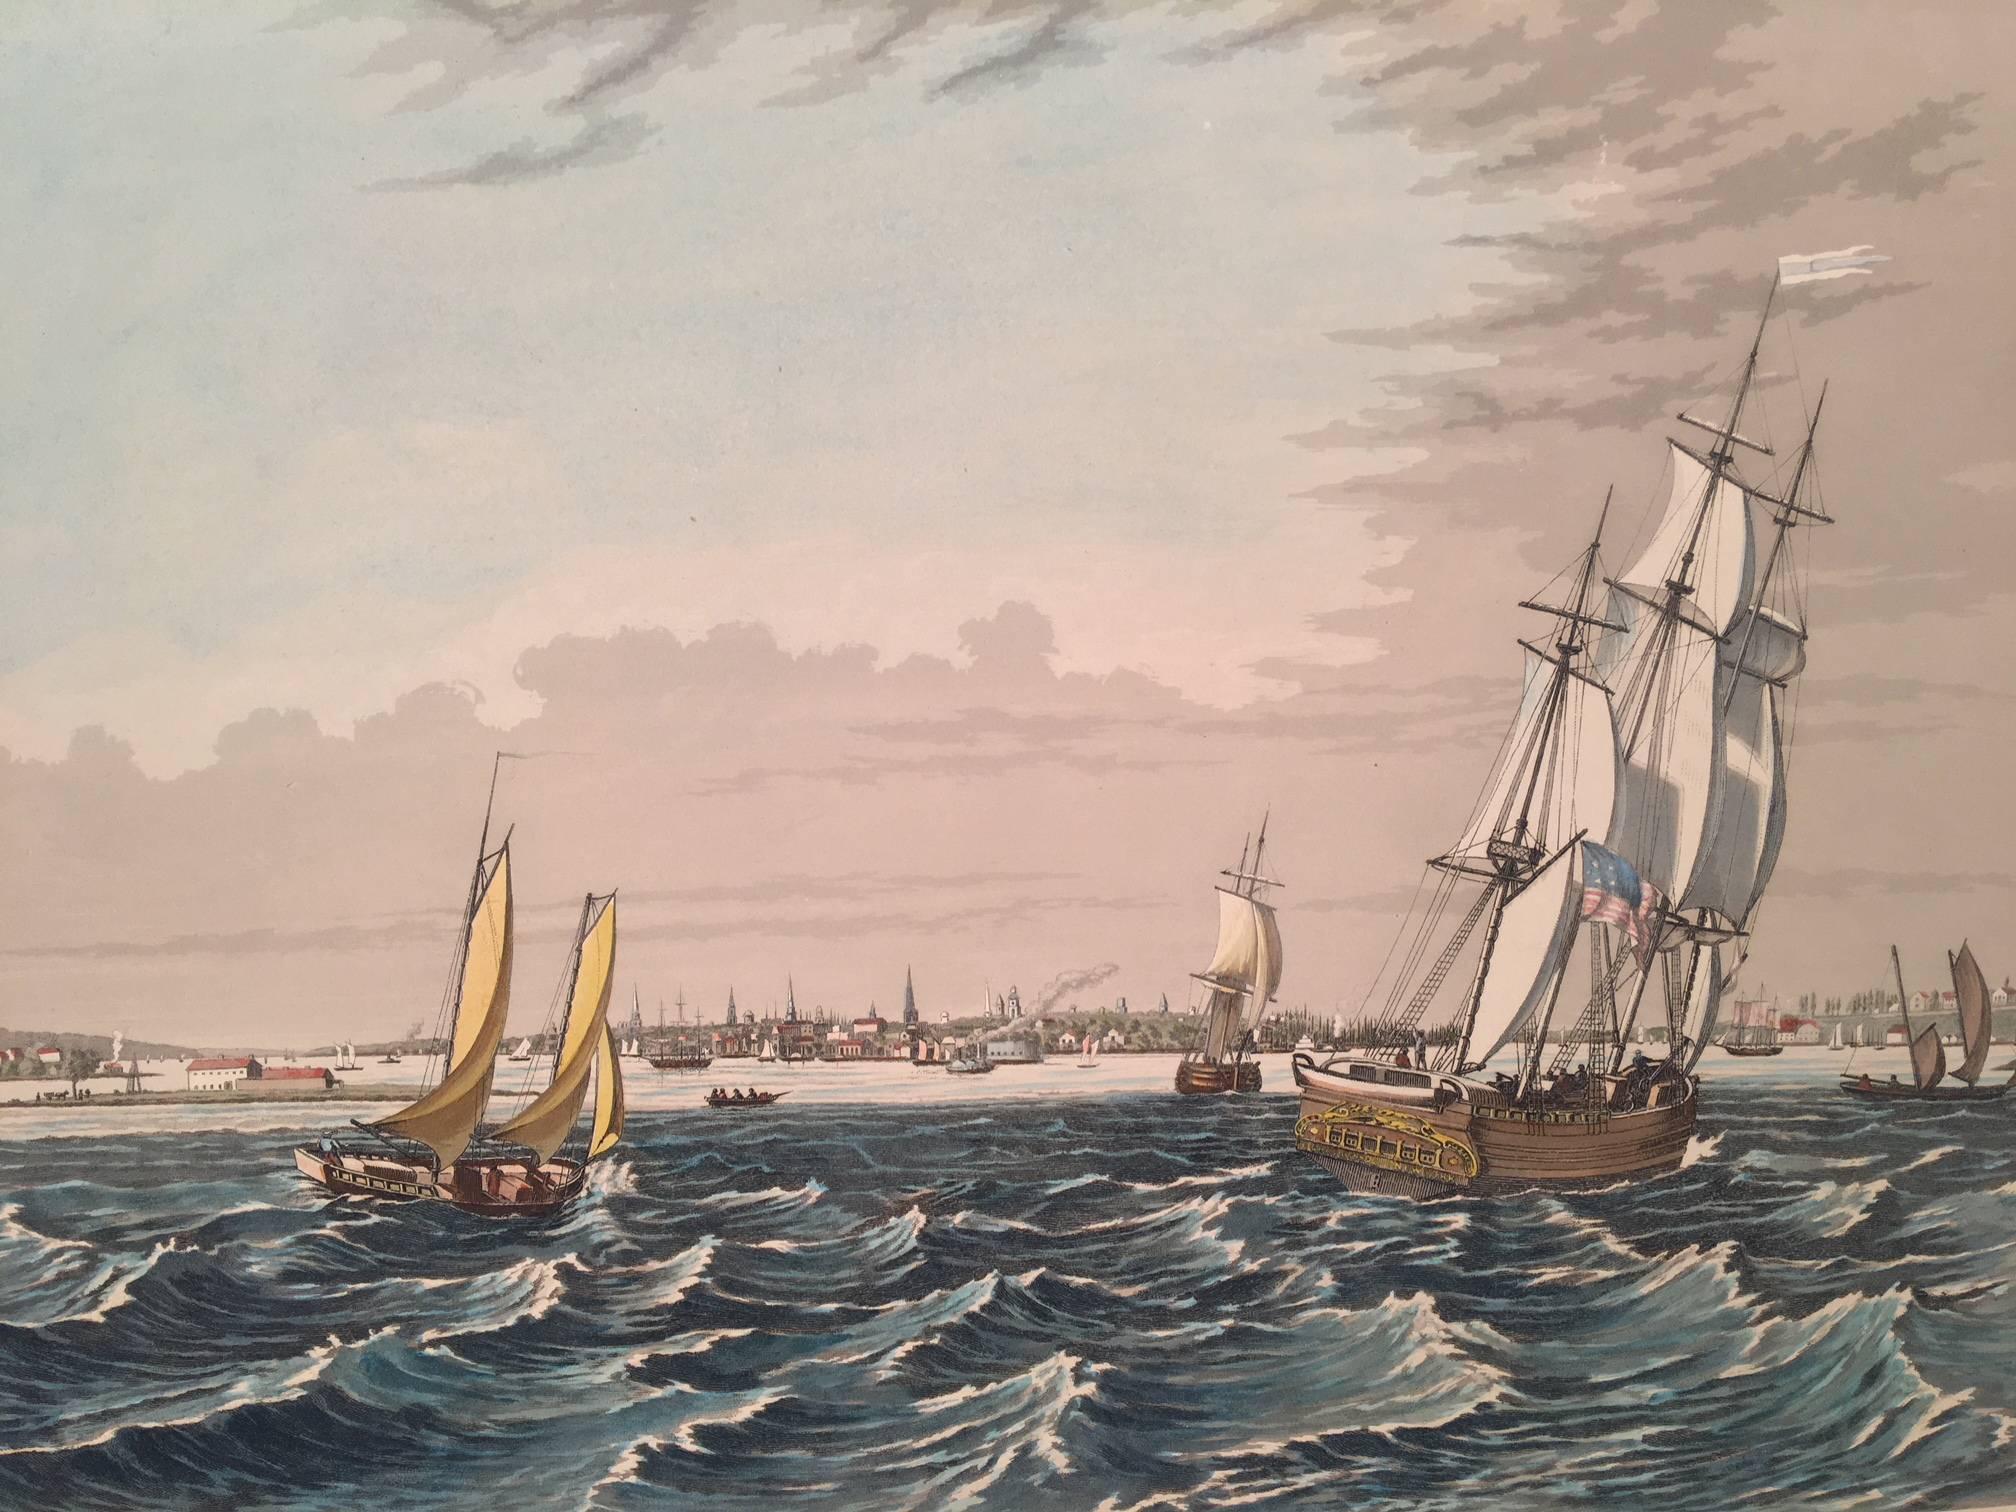 New York: 1835 From the Bay near Bedlows Island - Print by Raoul Varin